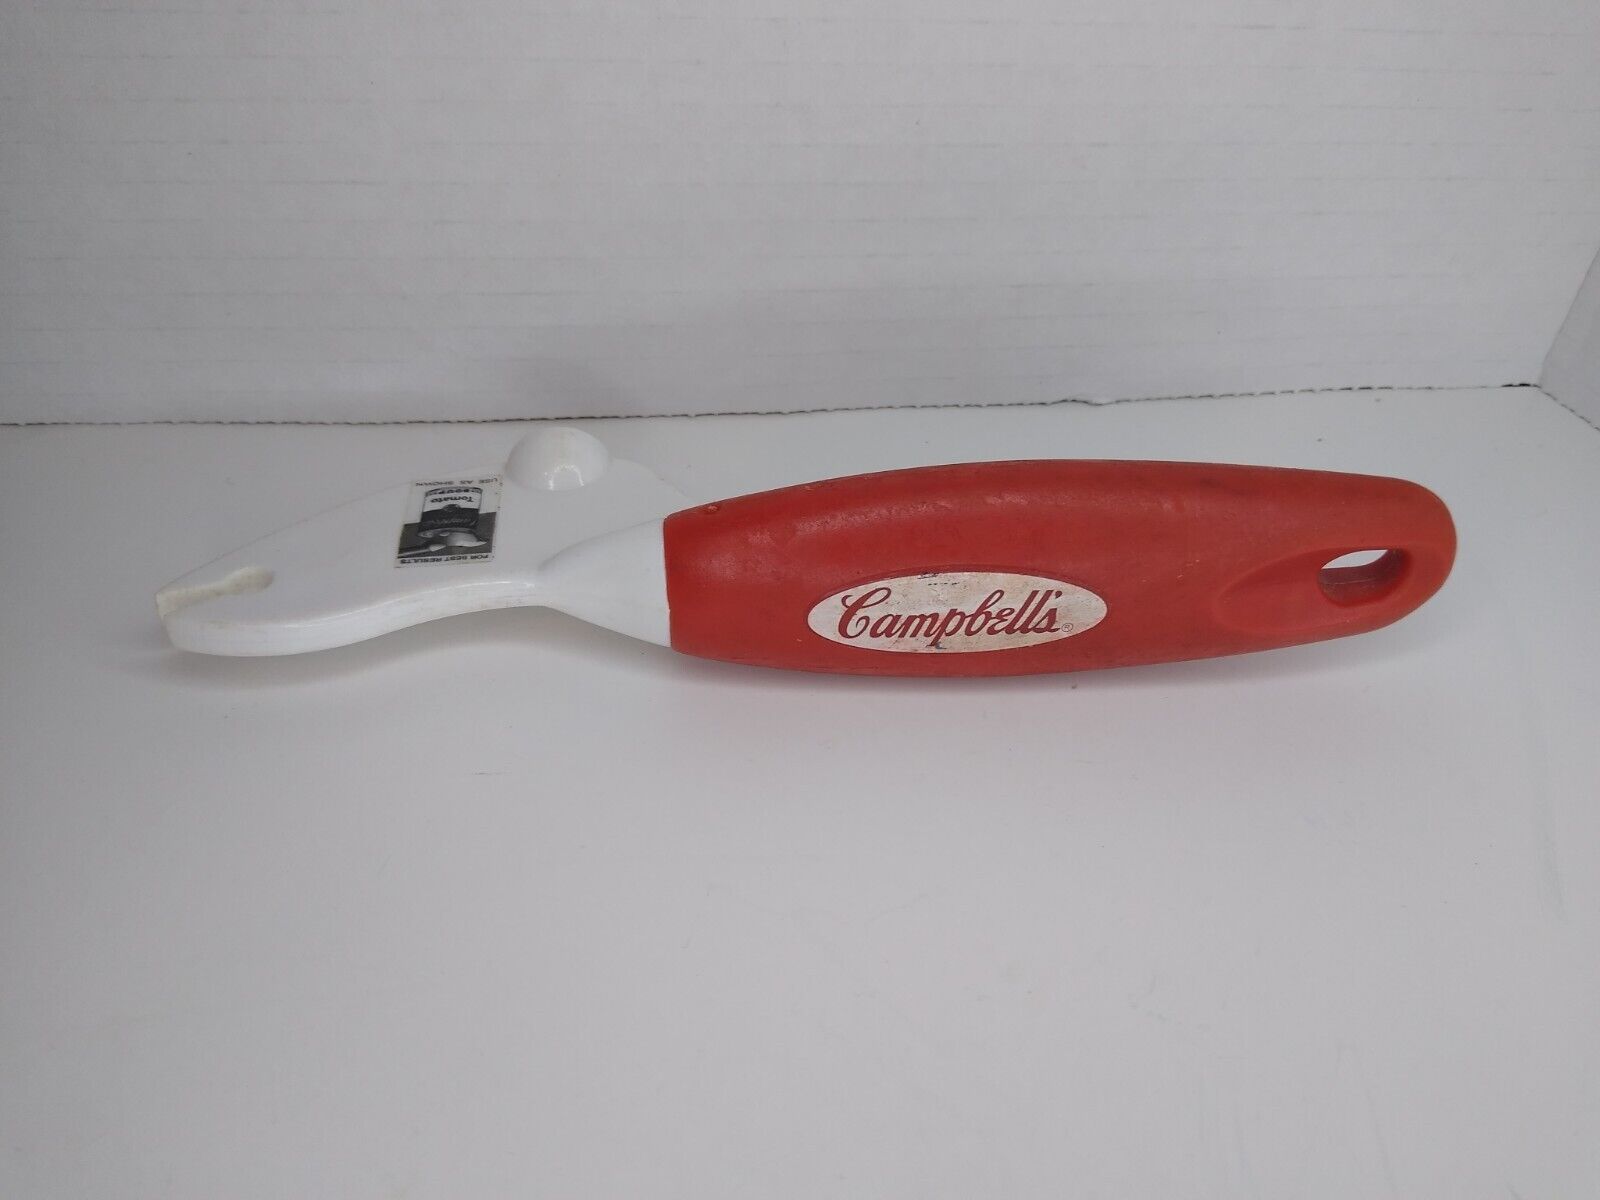 Campbells Soup Easy Open Pop N Pull Can Tab Lifter Opener Tool With Lid Magnet